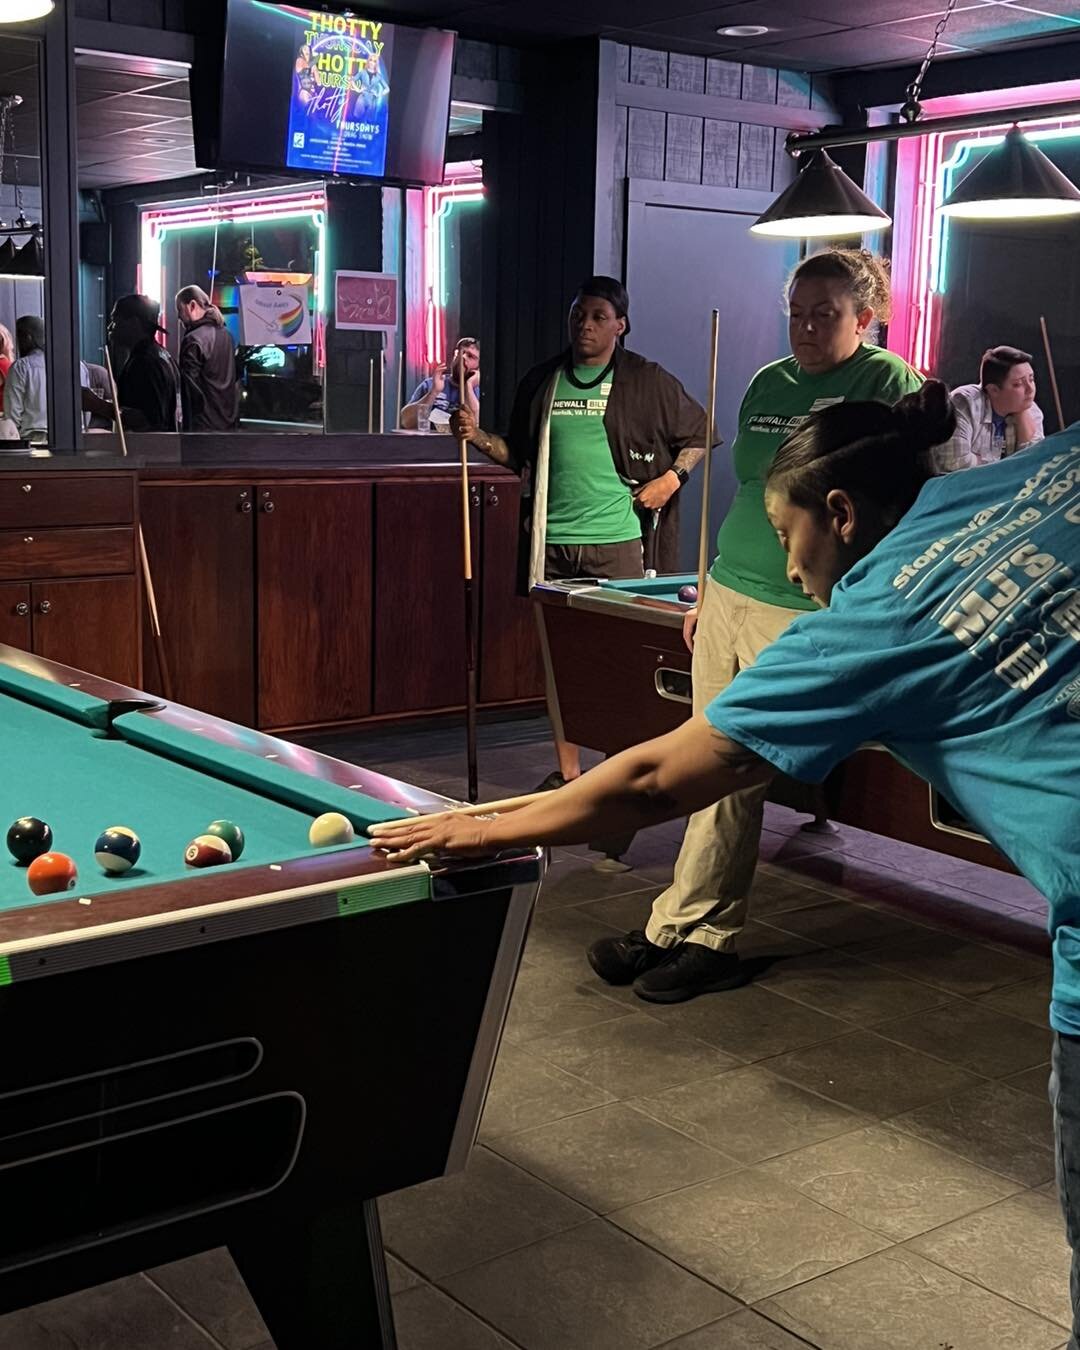 Tonight we close our newest sport. Cheers to a great first season of billiards!

#stonewallsportsnorfolk #stonewallsports